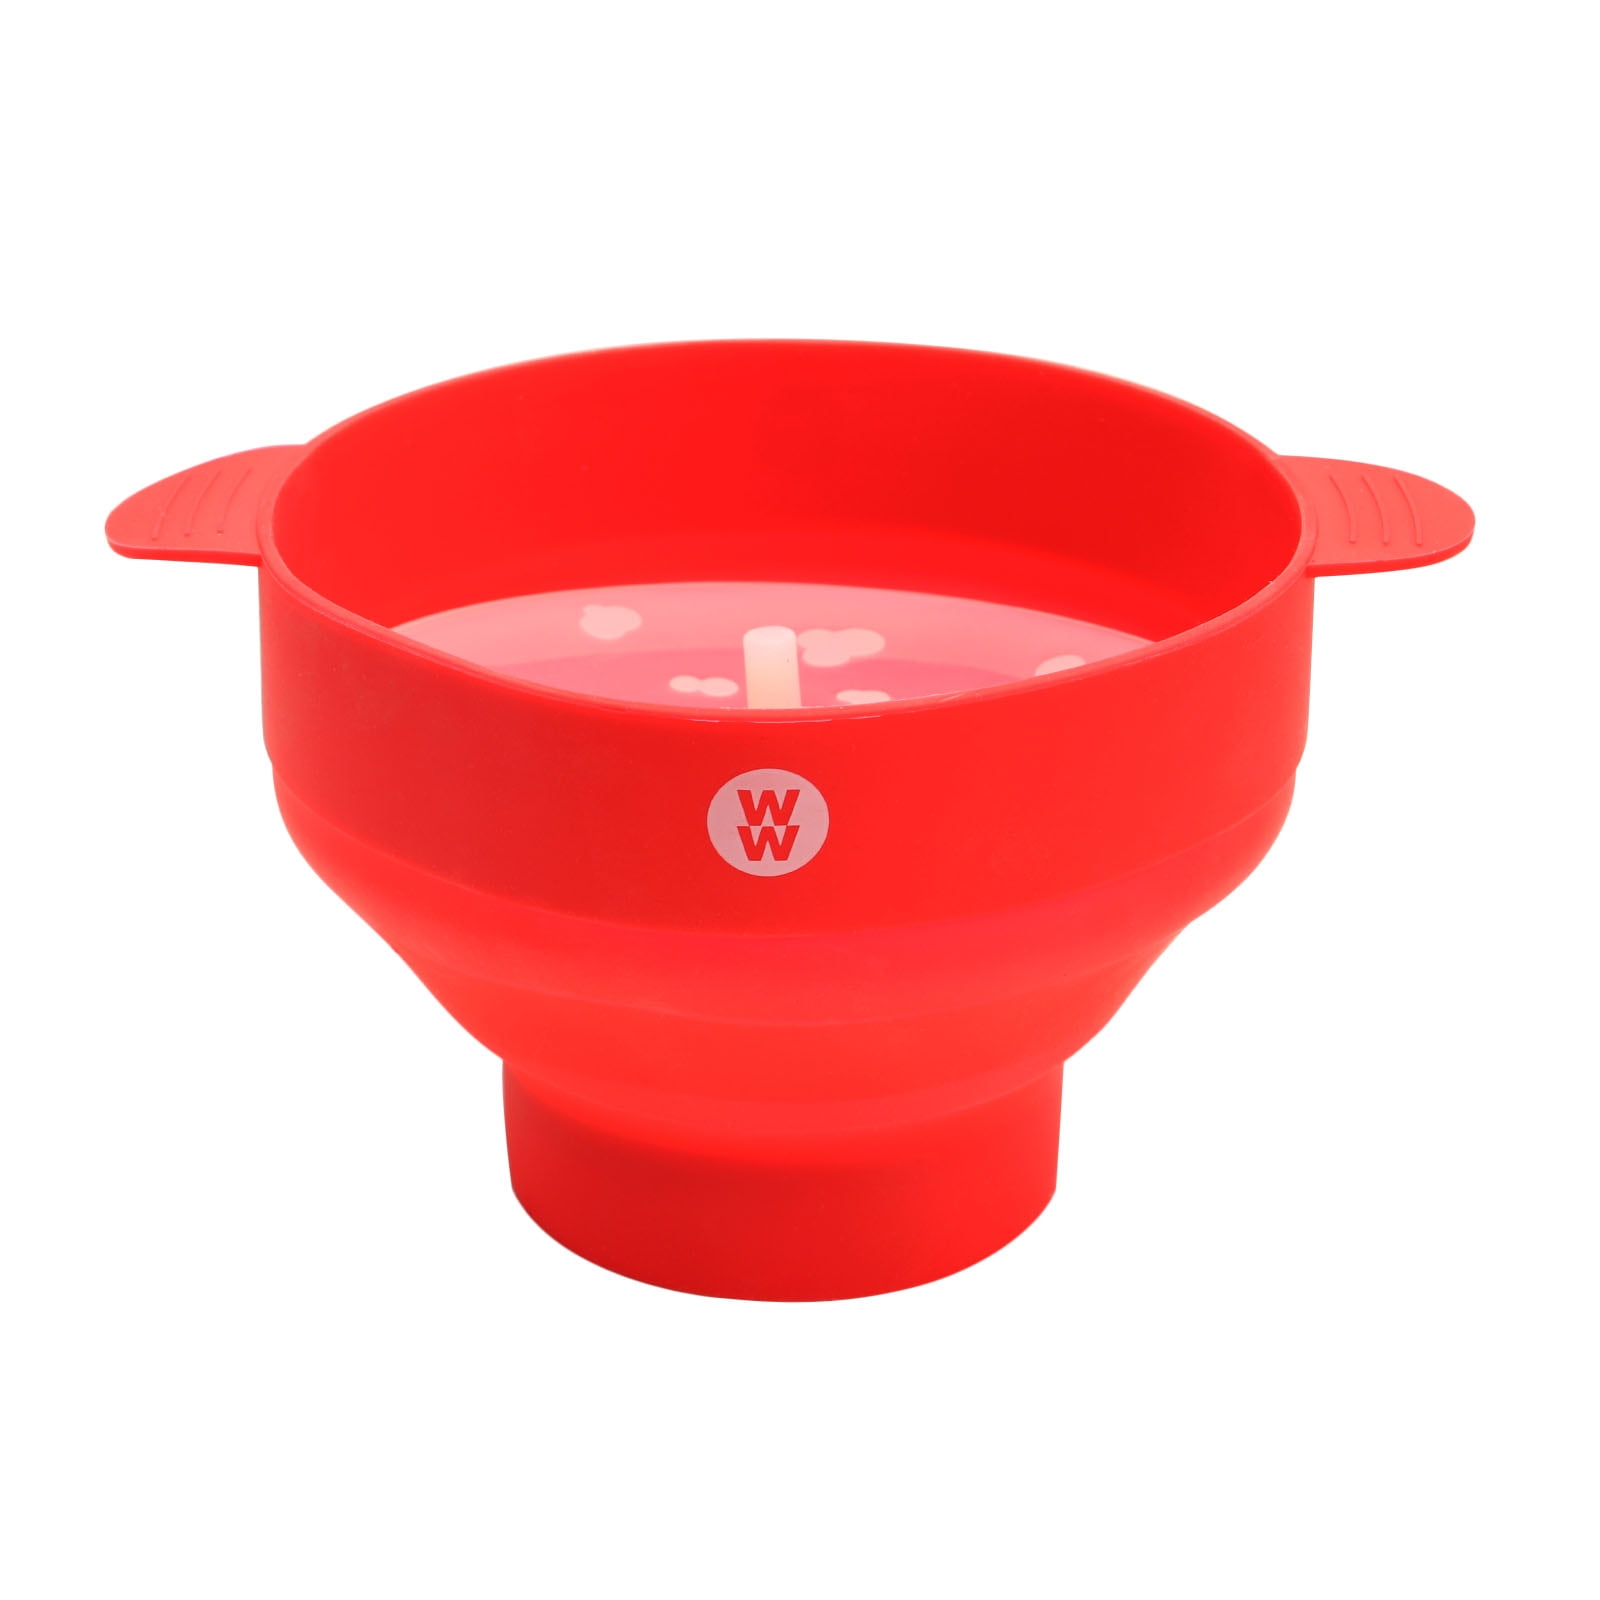 W&P Microwave Silicone Personal Popcorn Popper Maker, Red